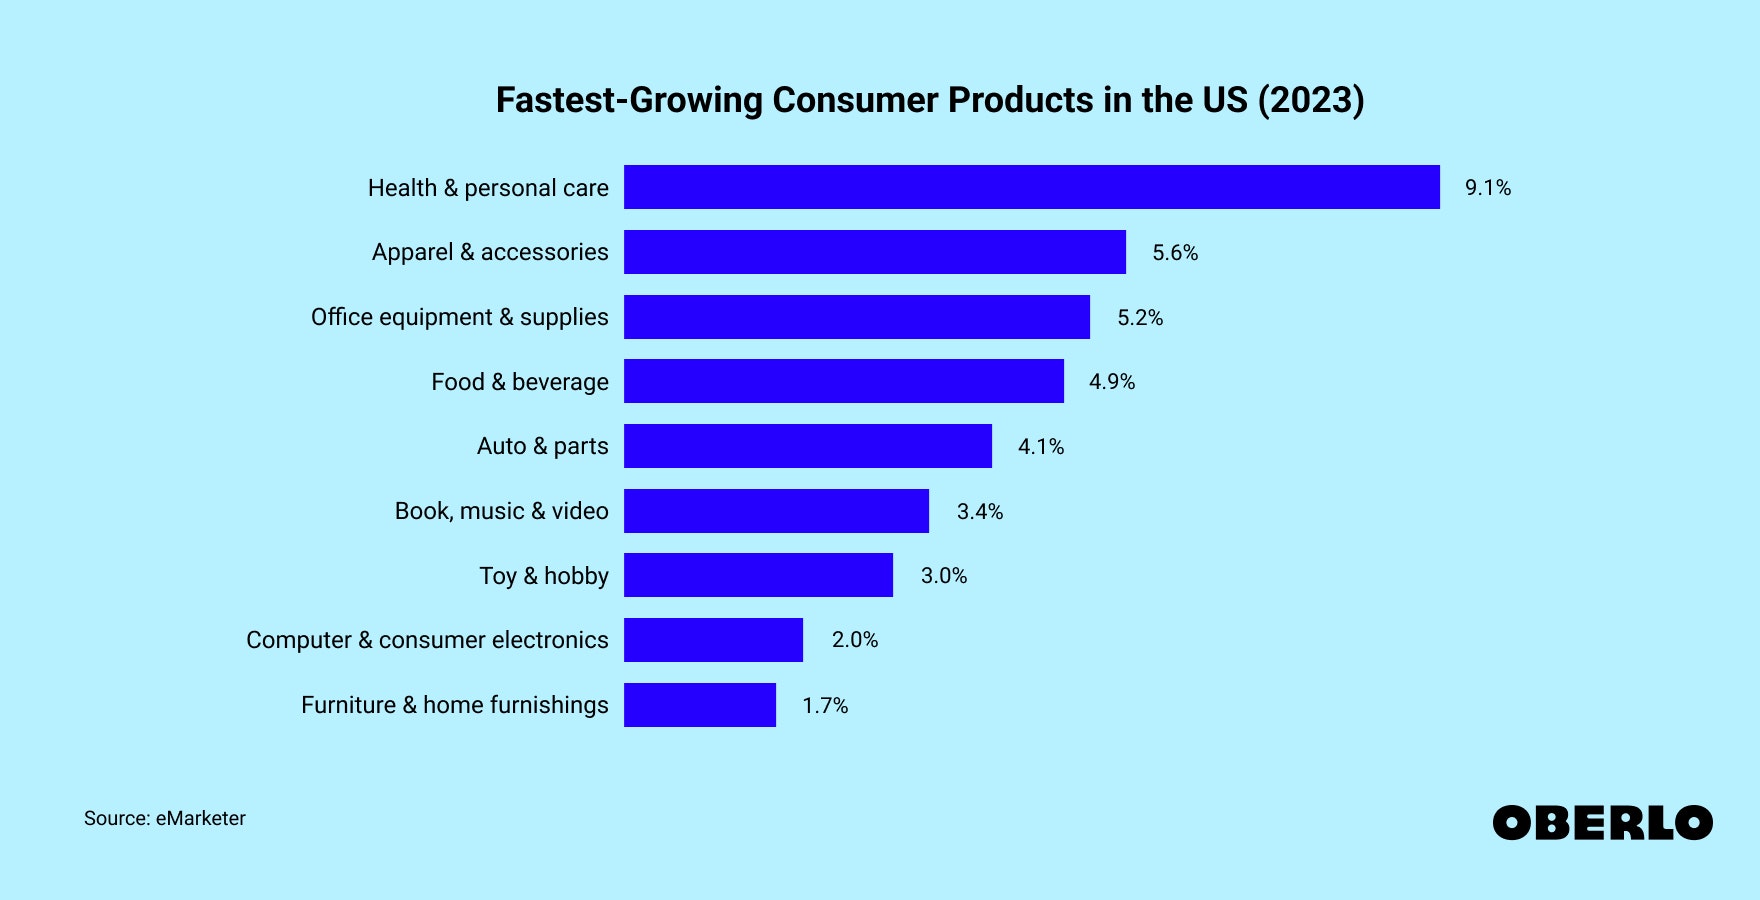 Chart showing: Fastest-Growing Consumer Products in the US in 2023